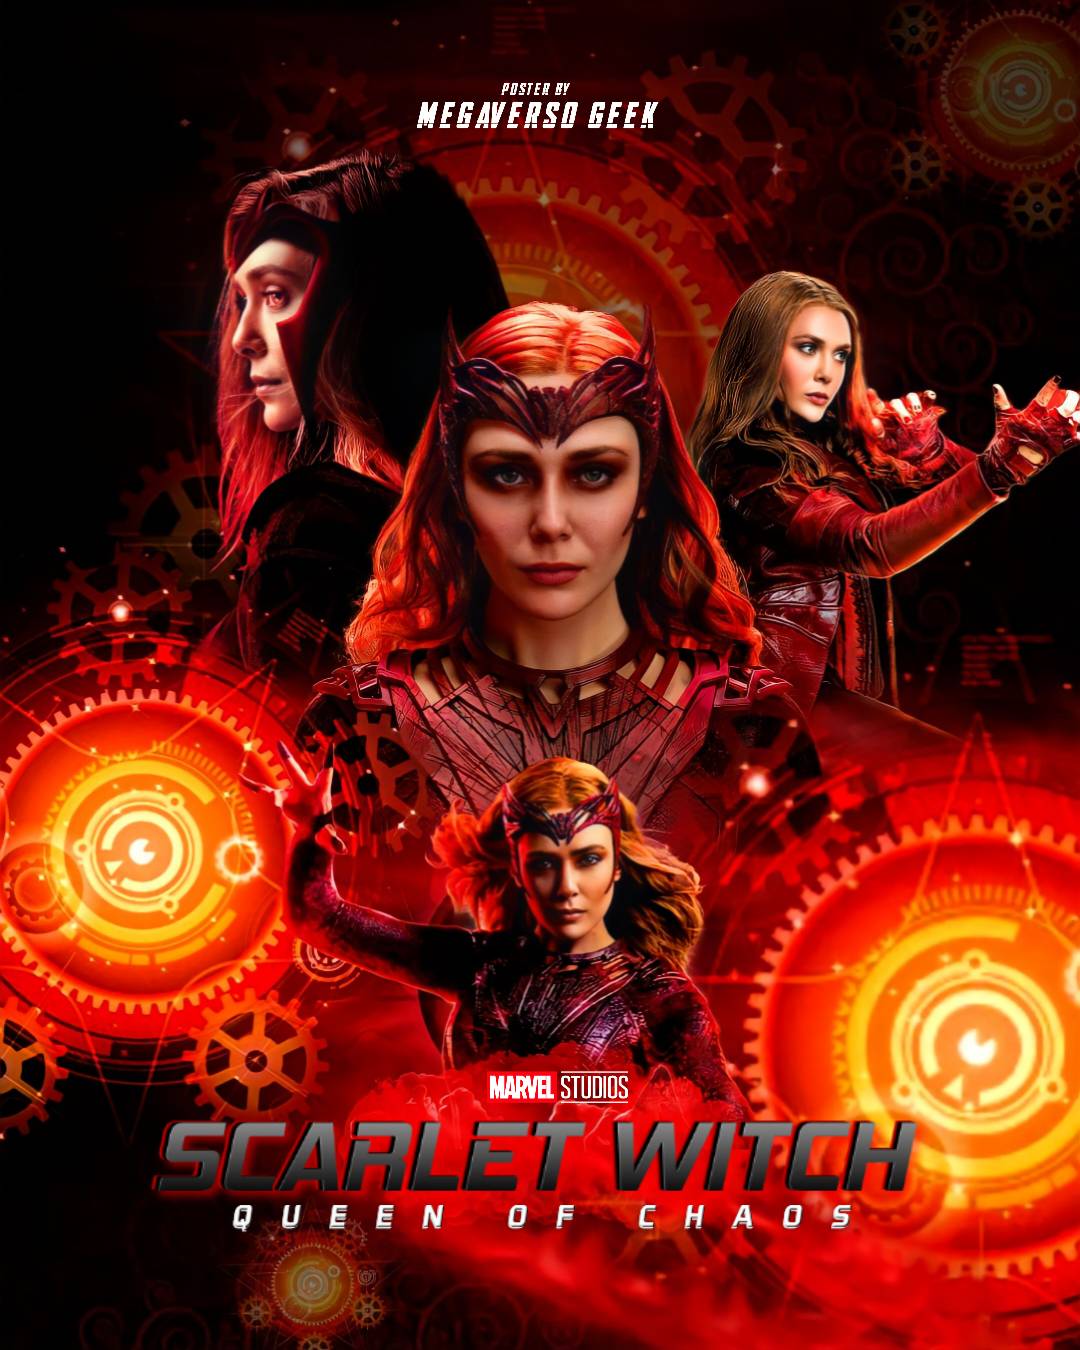 Scarlet Witch and Quicksilver by jasric on DeviantArt